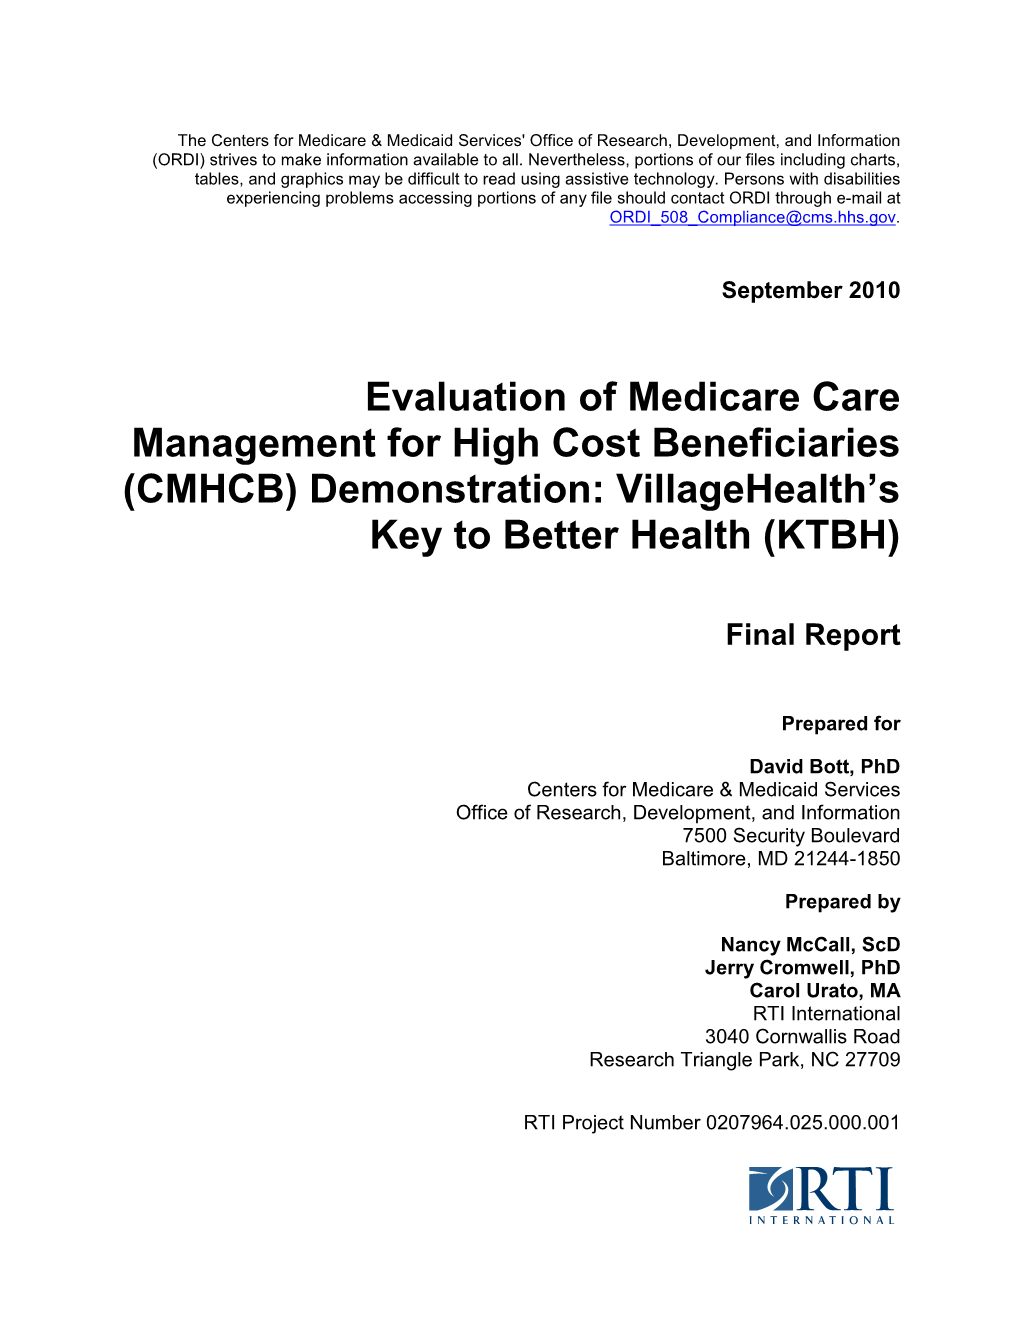 Evaluation of Medicare Care Management for High Cost Beneficiaries (CMHCB) Demonstration: Villagehealth’S Key to Better Health (KTBH)